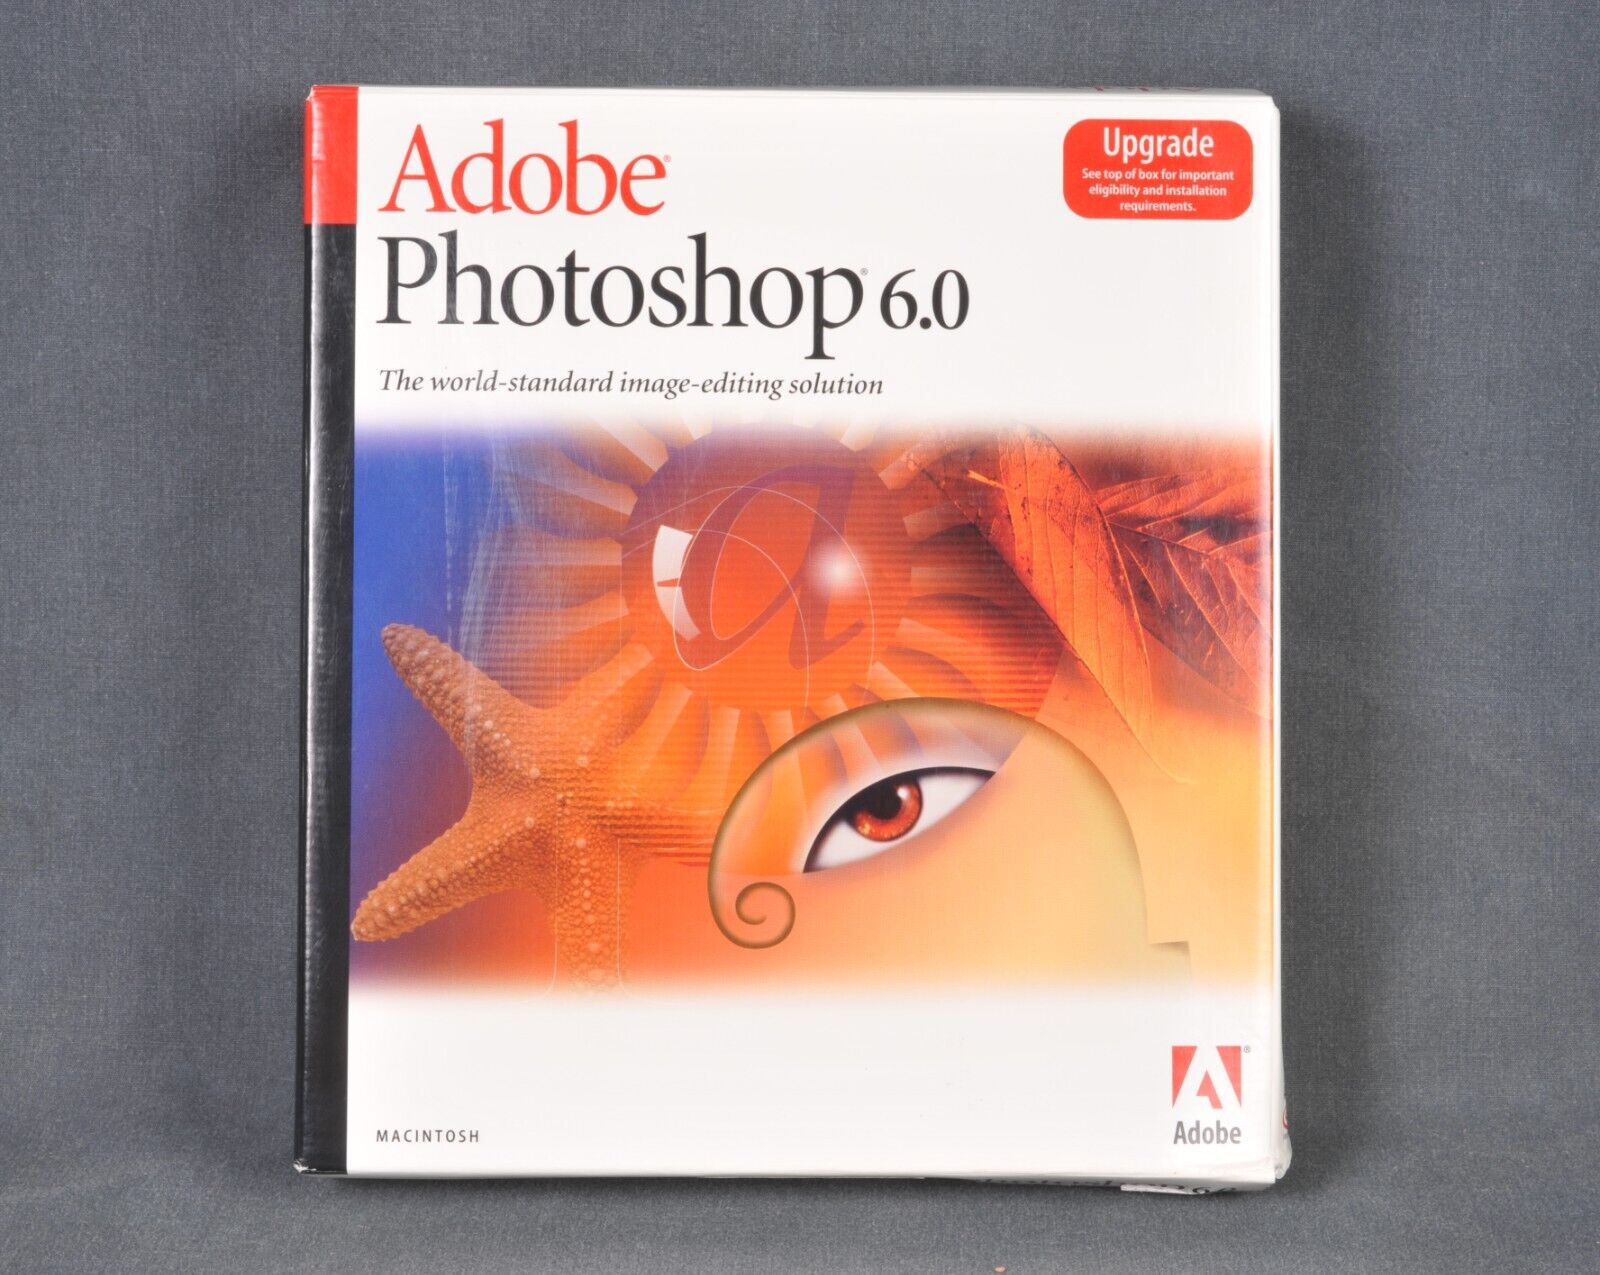 Adobe Photoshop 6.0 Upgrade With Image Ready 3.0 For Macintosh With User Guide